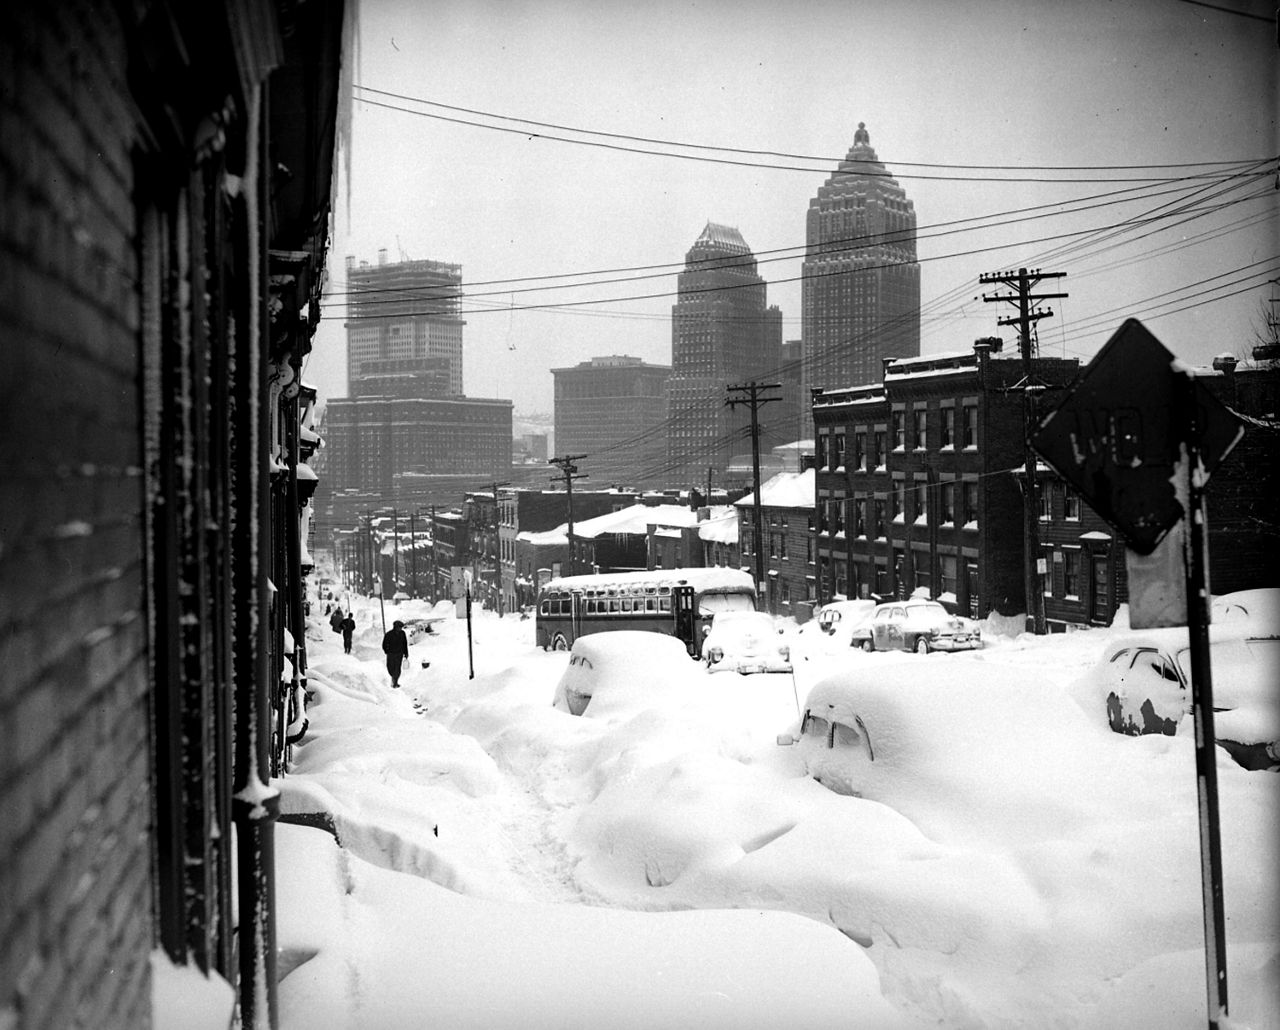 Looking toward downtown Pittsburgh, Webster Avenue is buried in snow, Nov. 26, 1950, after a record snowfall. The Mellon skyscraper is under construction at left in background. (AP Photo/Walter Stein)